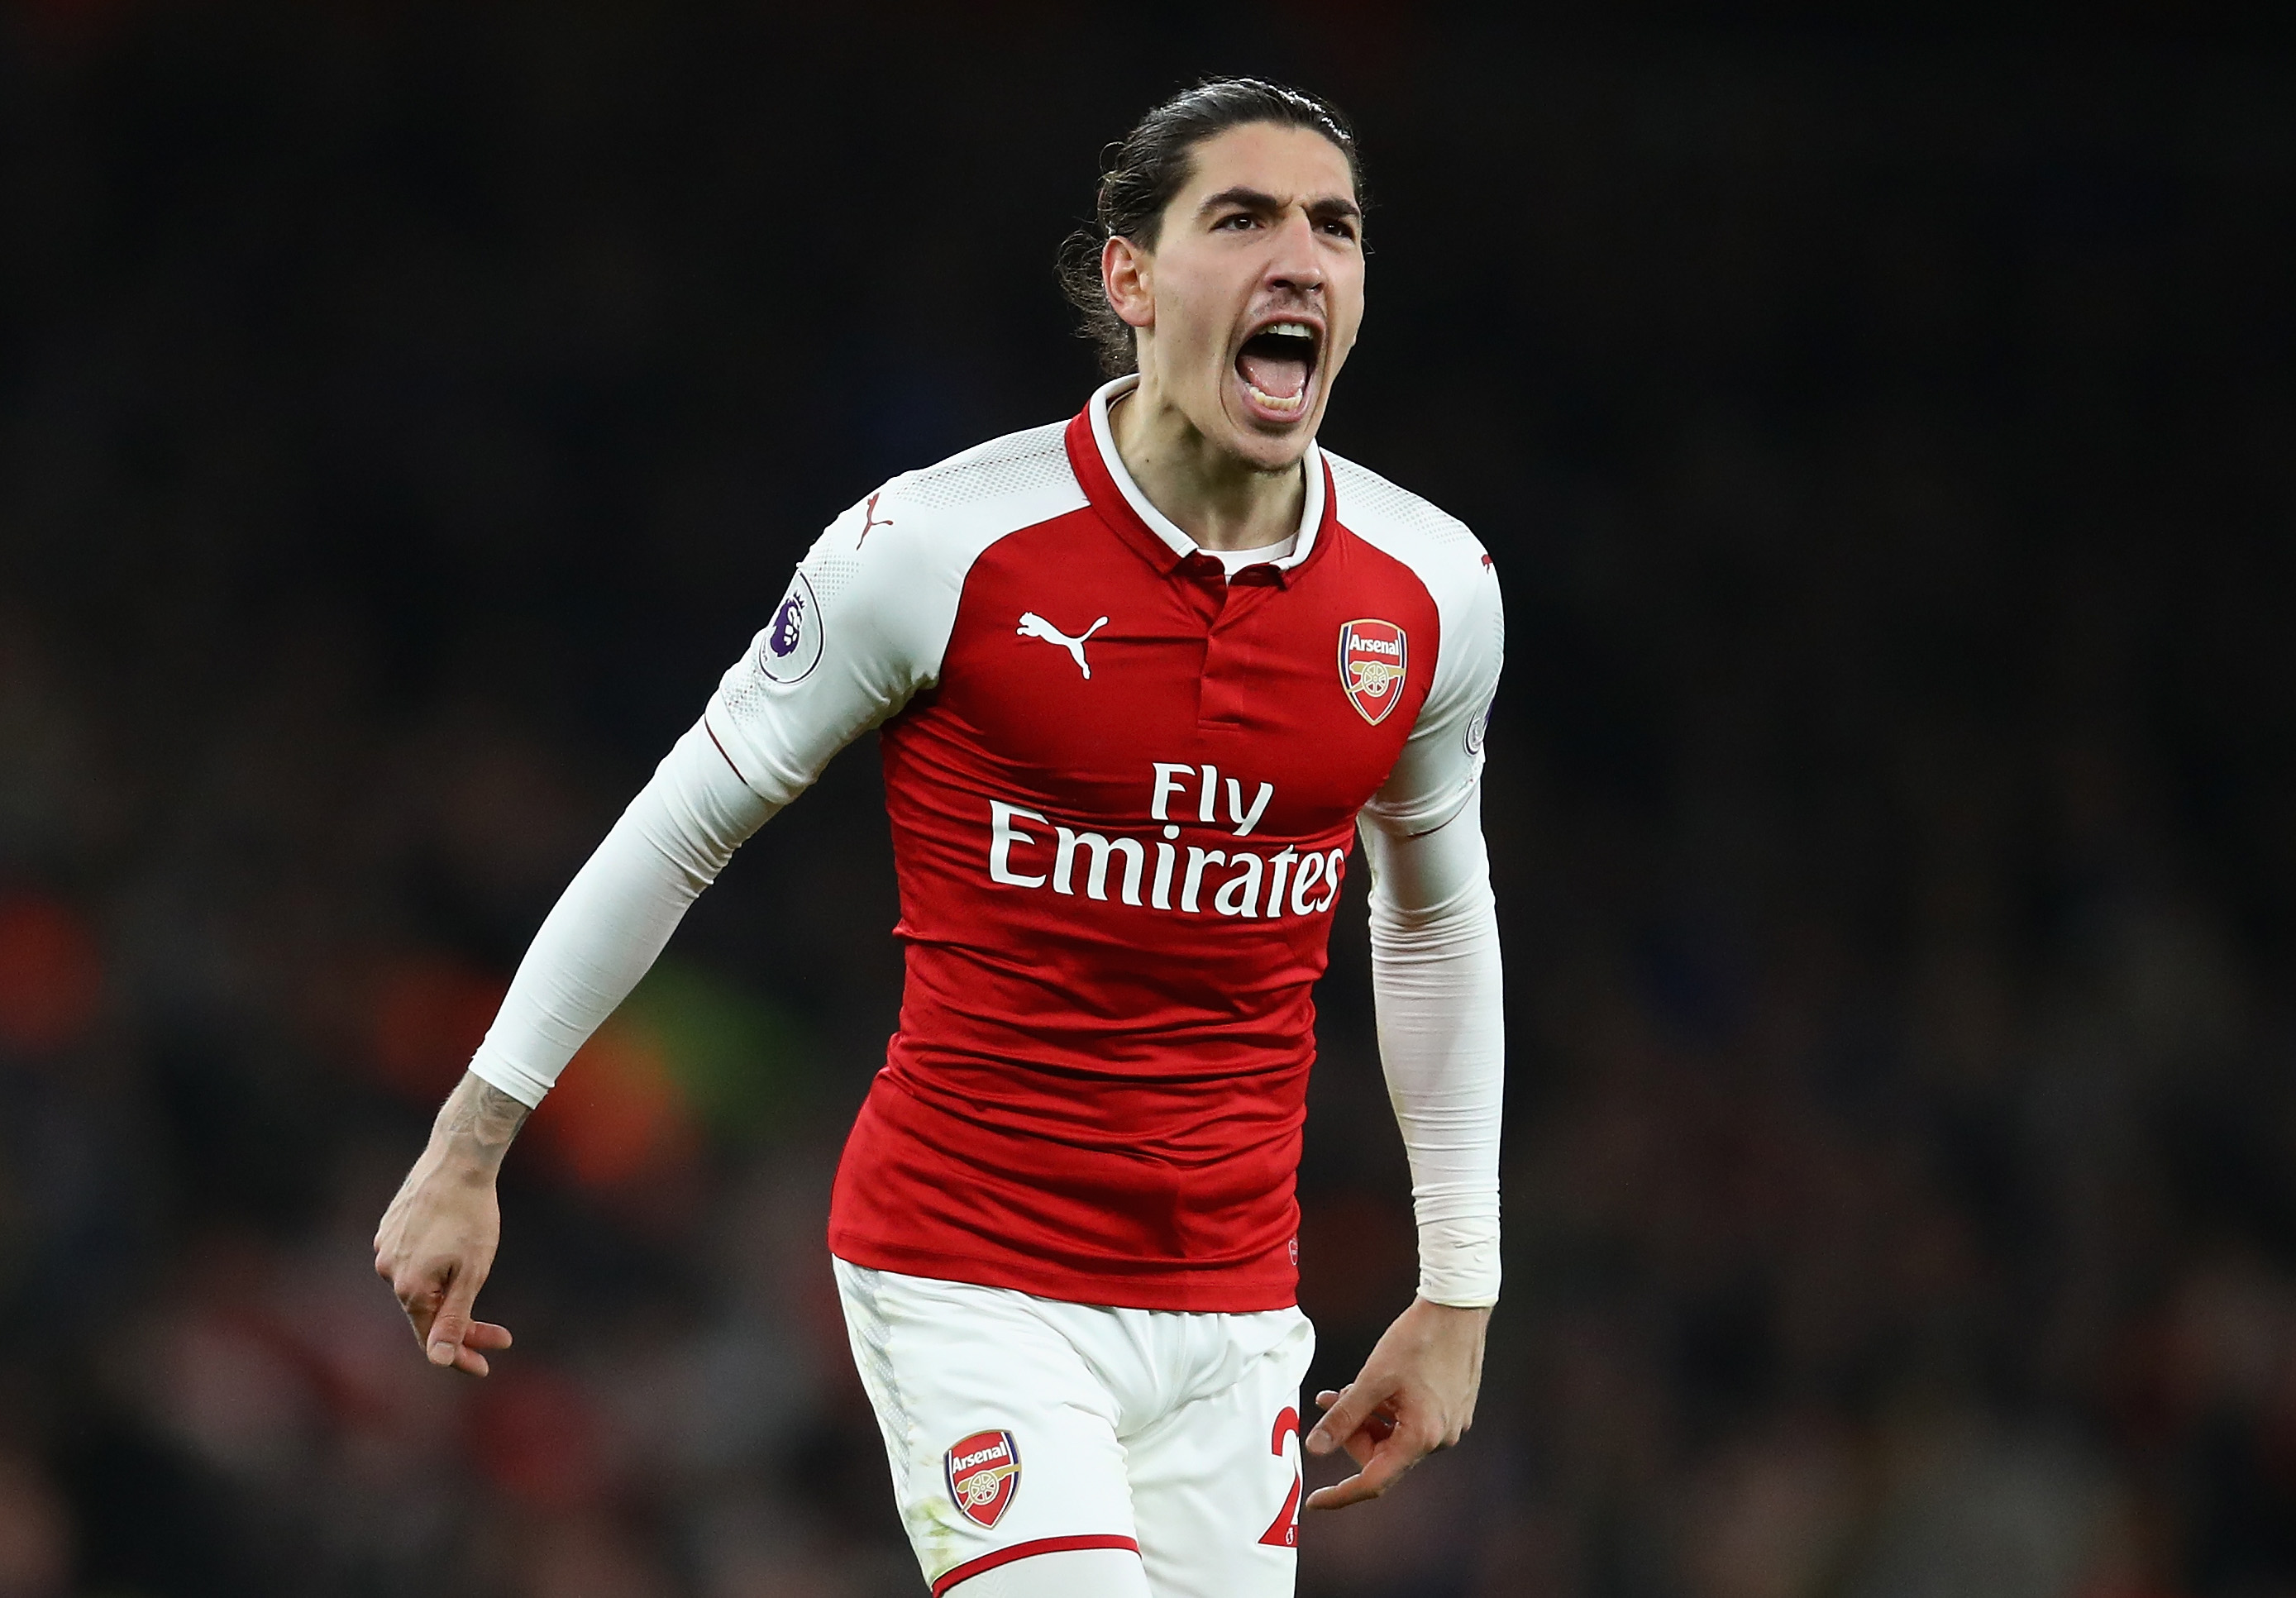 LONDON, ENGLAND - JANUARY 03:  Hector Bellerin of Arsenal celebrates scoring his teams second goal during the Premier League match between Arsenal and Chelsea at Emirates Stadium on January 3, 2018 in London, England.  (Photo by Julian Finney/Getty Images)